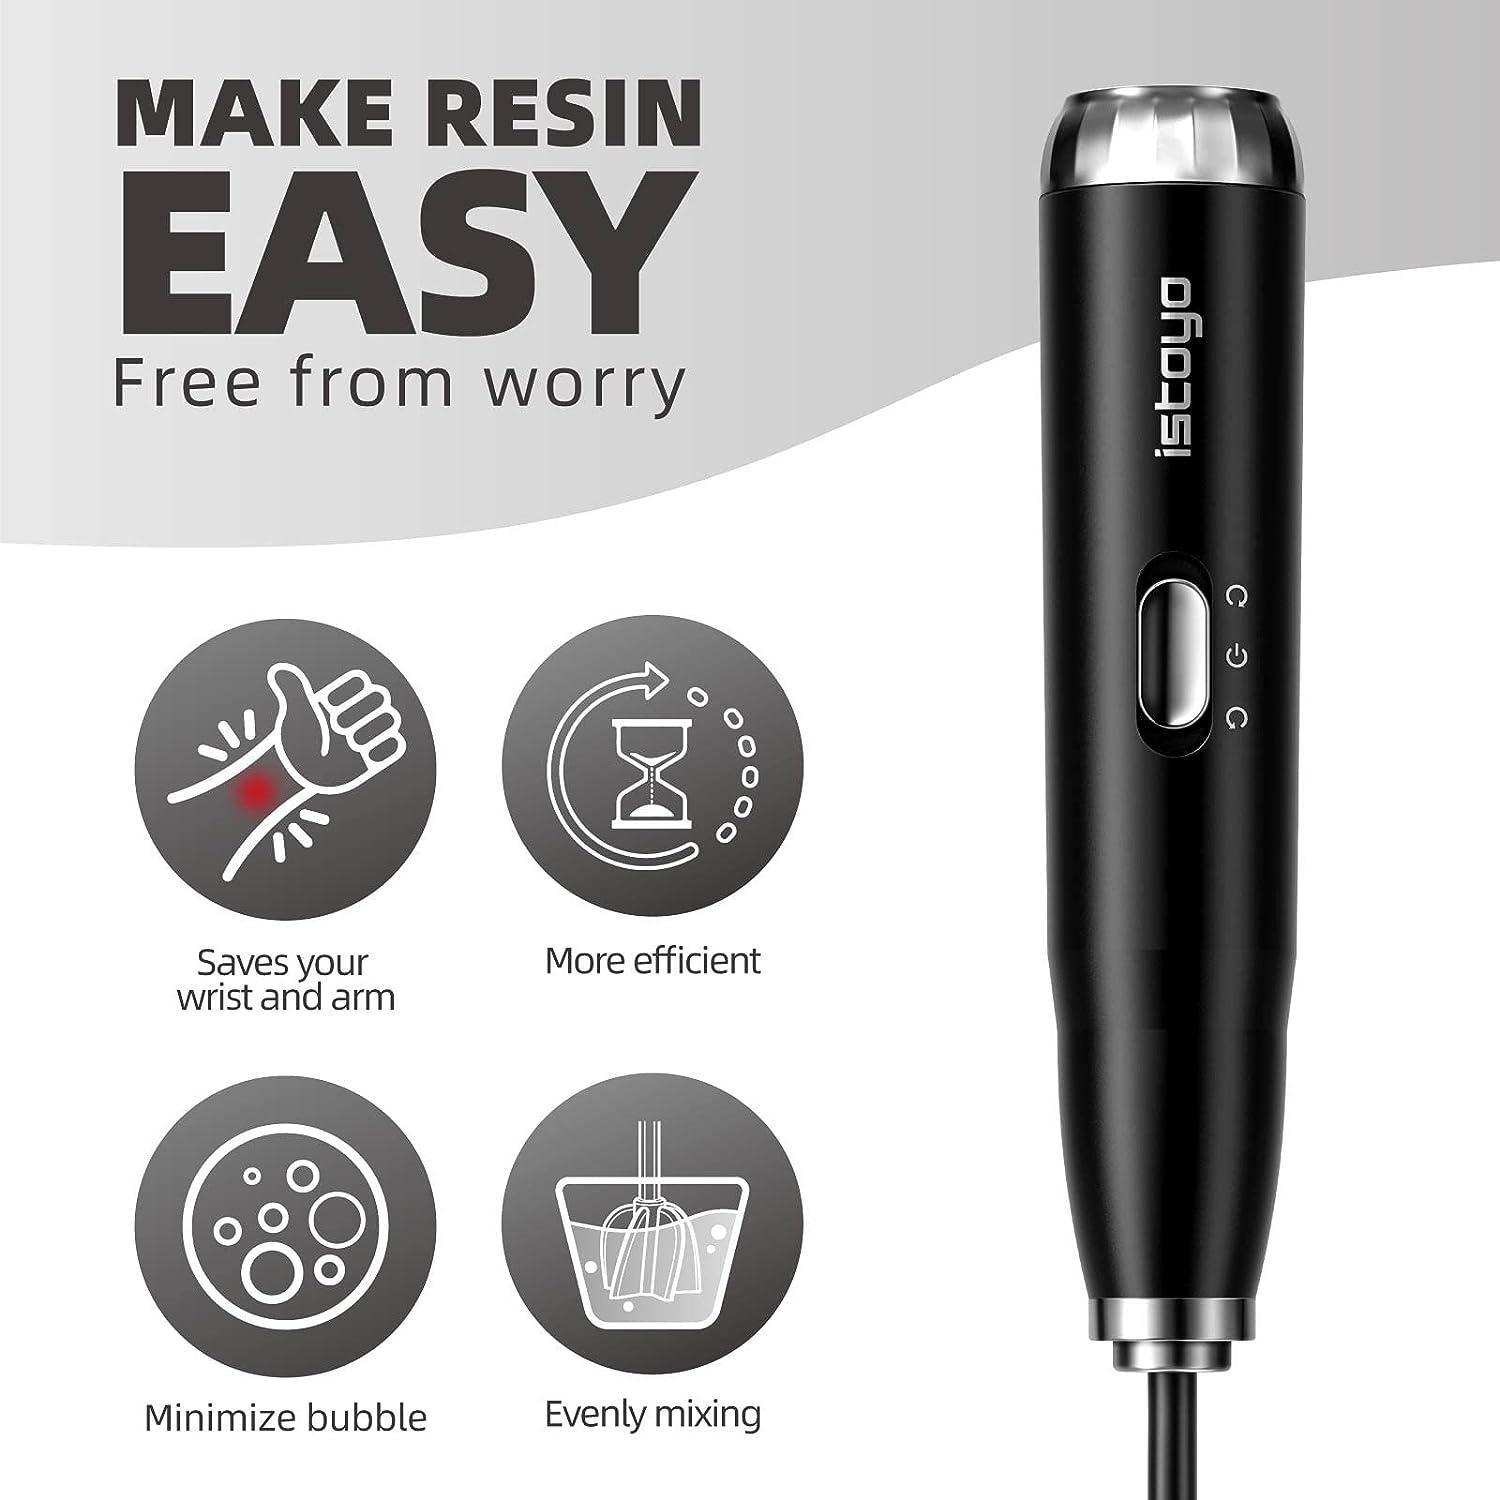 Epoxy Resin Mixer with 2 PCS Epoxy Mixer Paddles, Handheld Rechargeable  Mixer with Minimizing Bubbles for Resin, Silicone Mixing, Resin Molds,  Resin Supplies, DIY Crafts